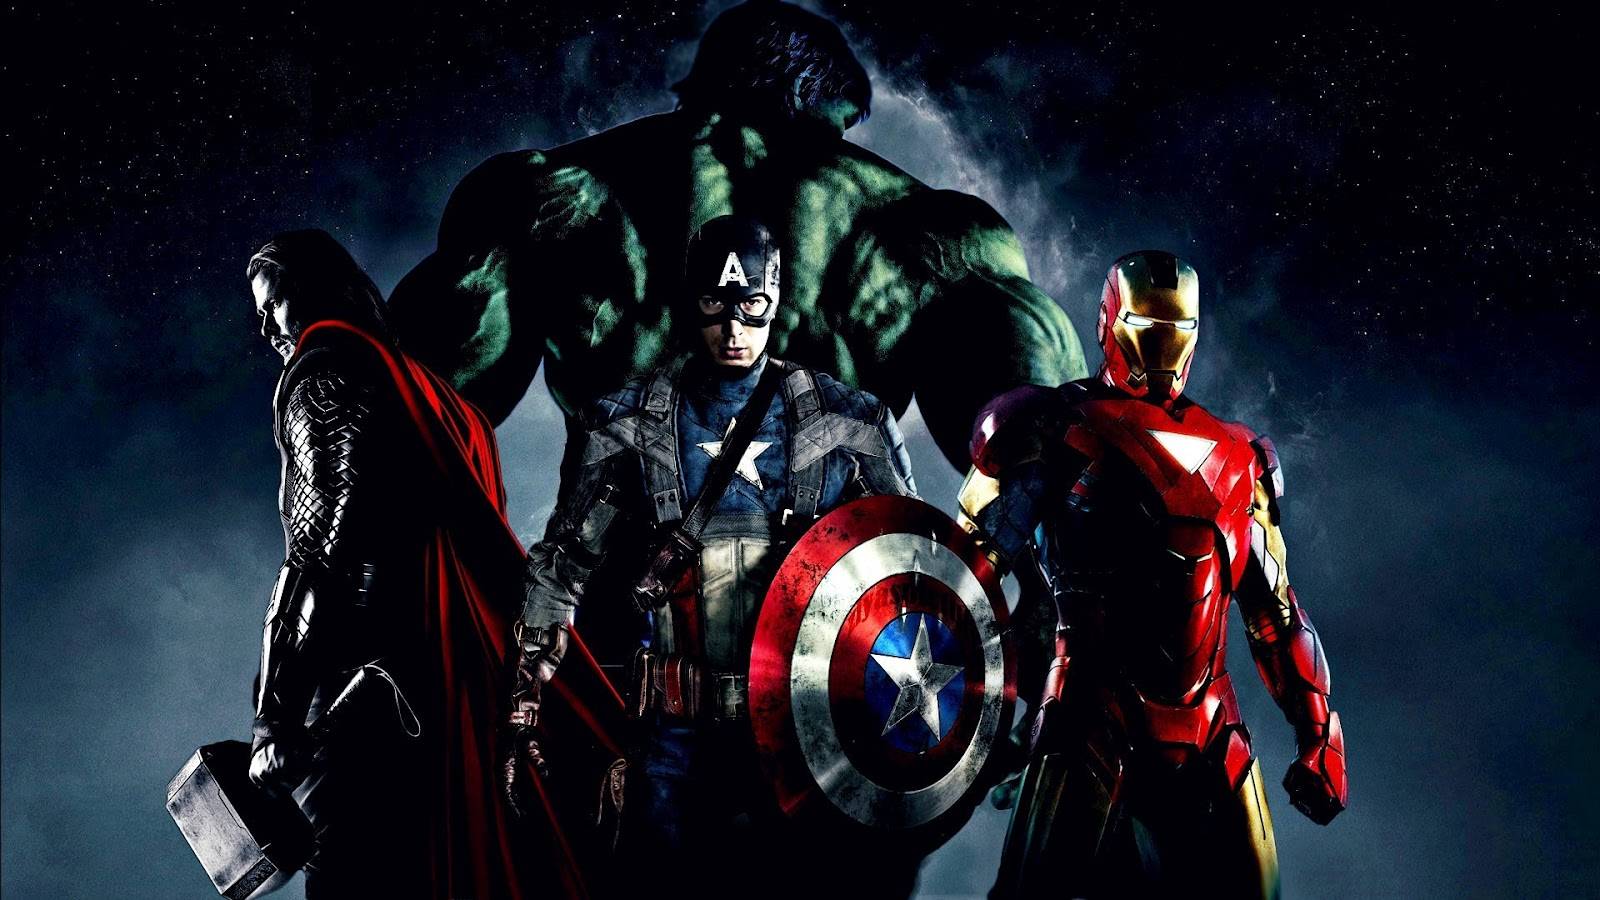 The Avengers Your Geeky Wallpapers HD Wallpapers Download Free Images Wallpaper [wallpaper981.blogspot.com]